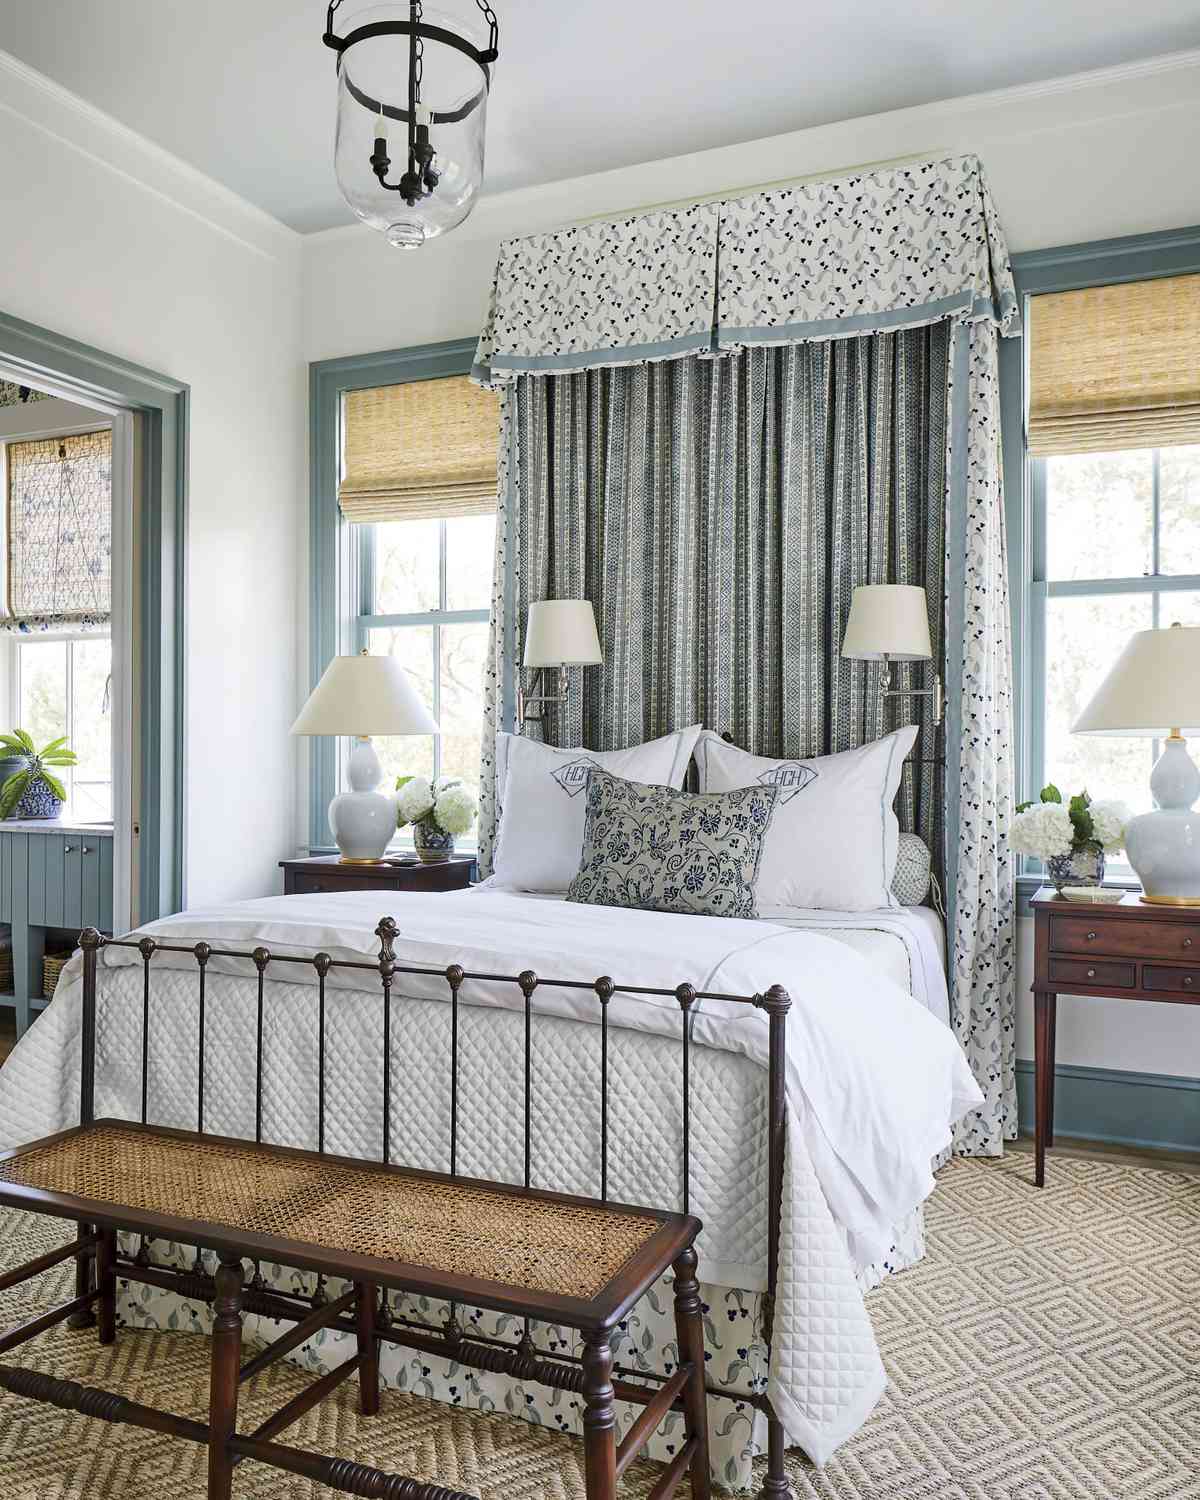 15 Calming Colors For Your Home Soothing And Relaxing Paint Colors Southern Living